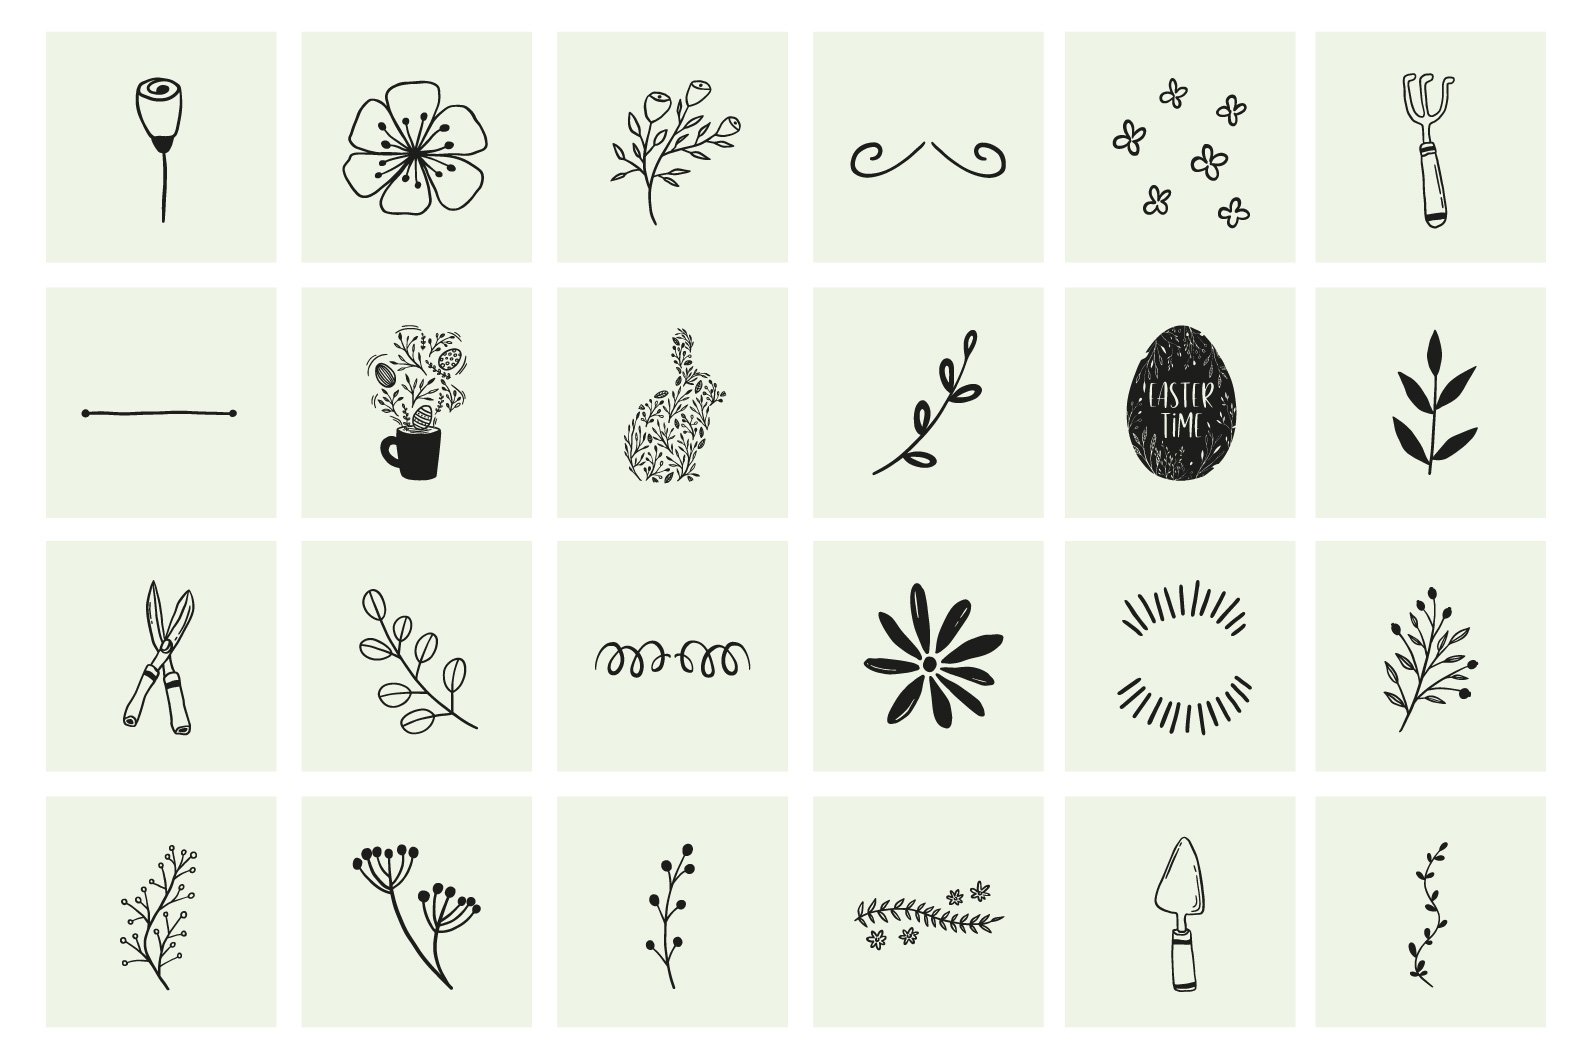 Cute flowers for your spring illustrations.